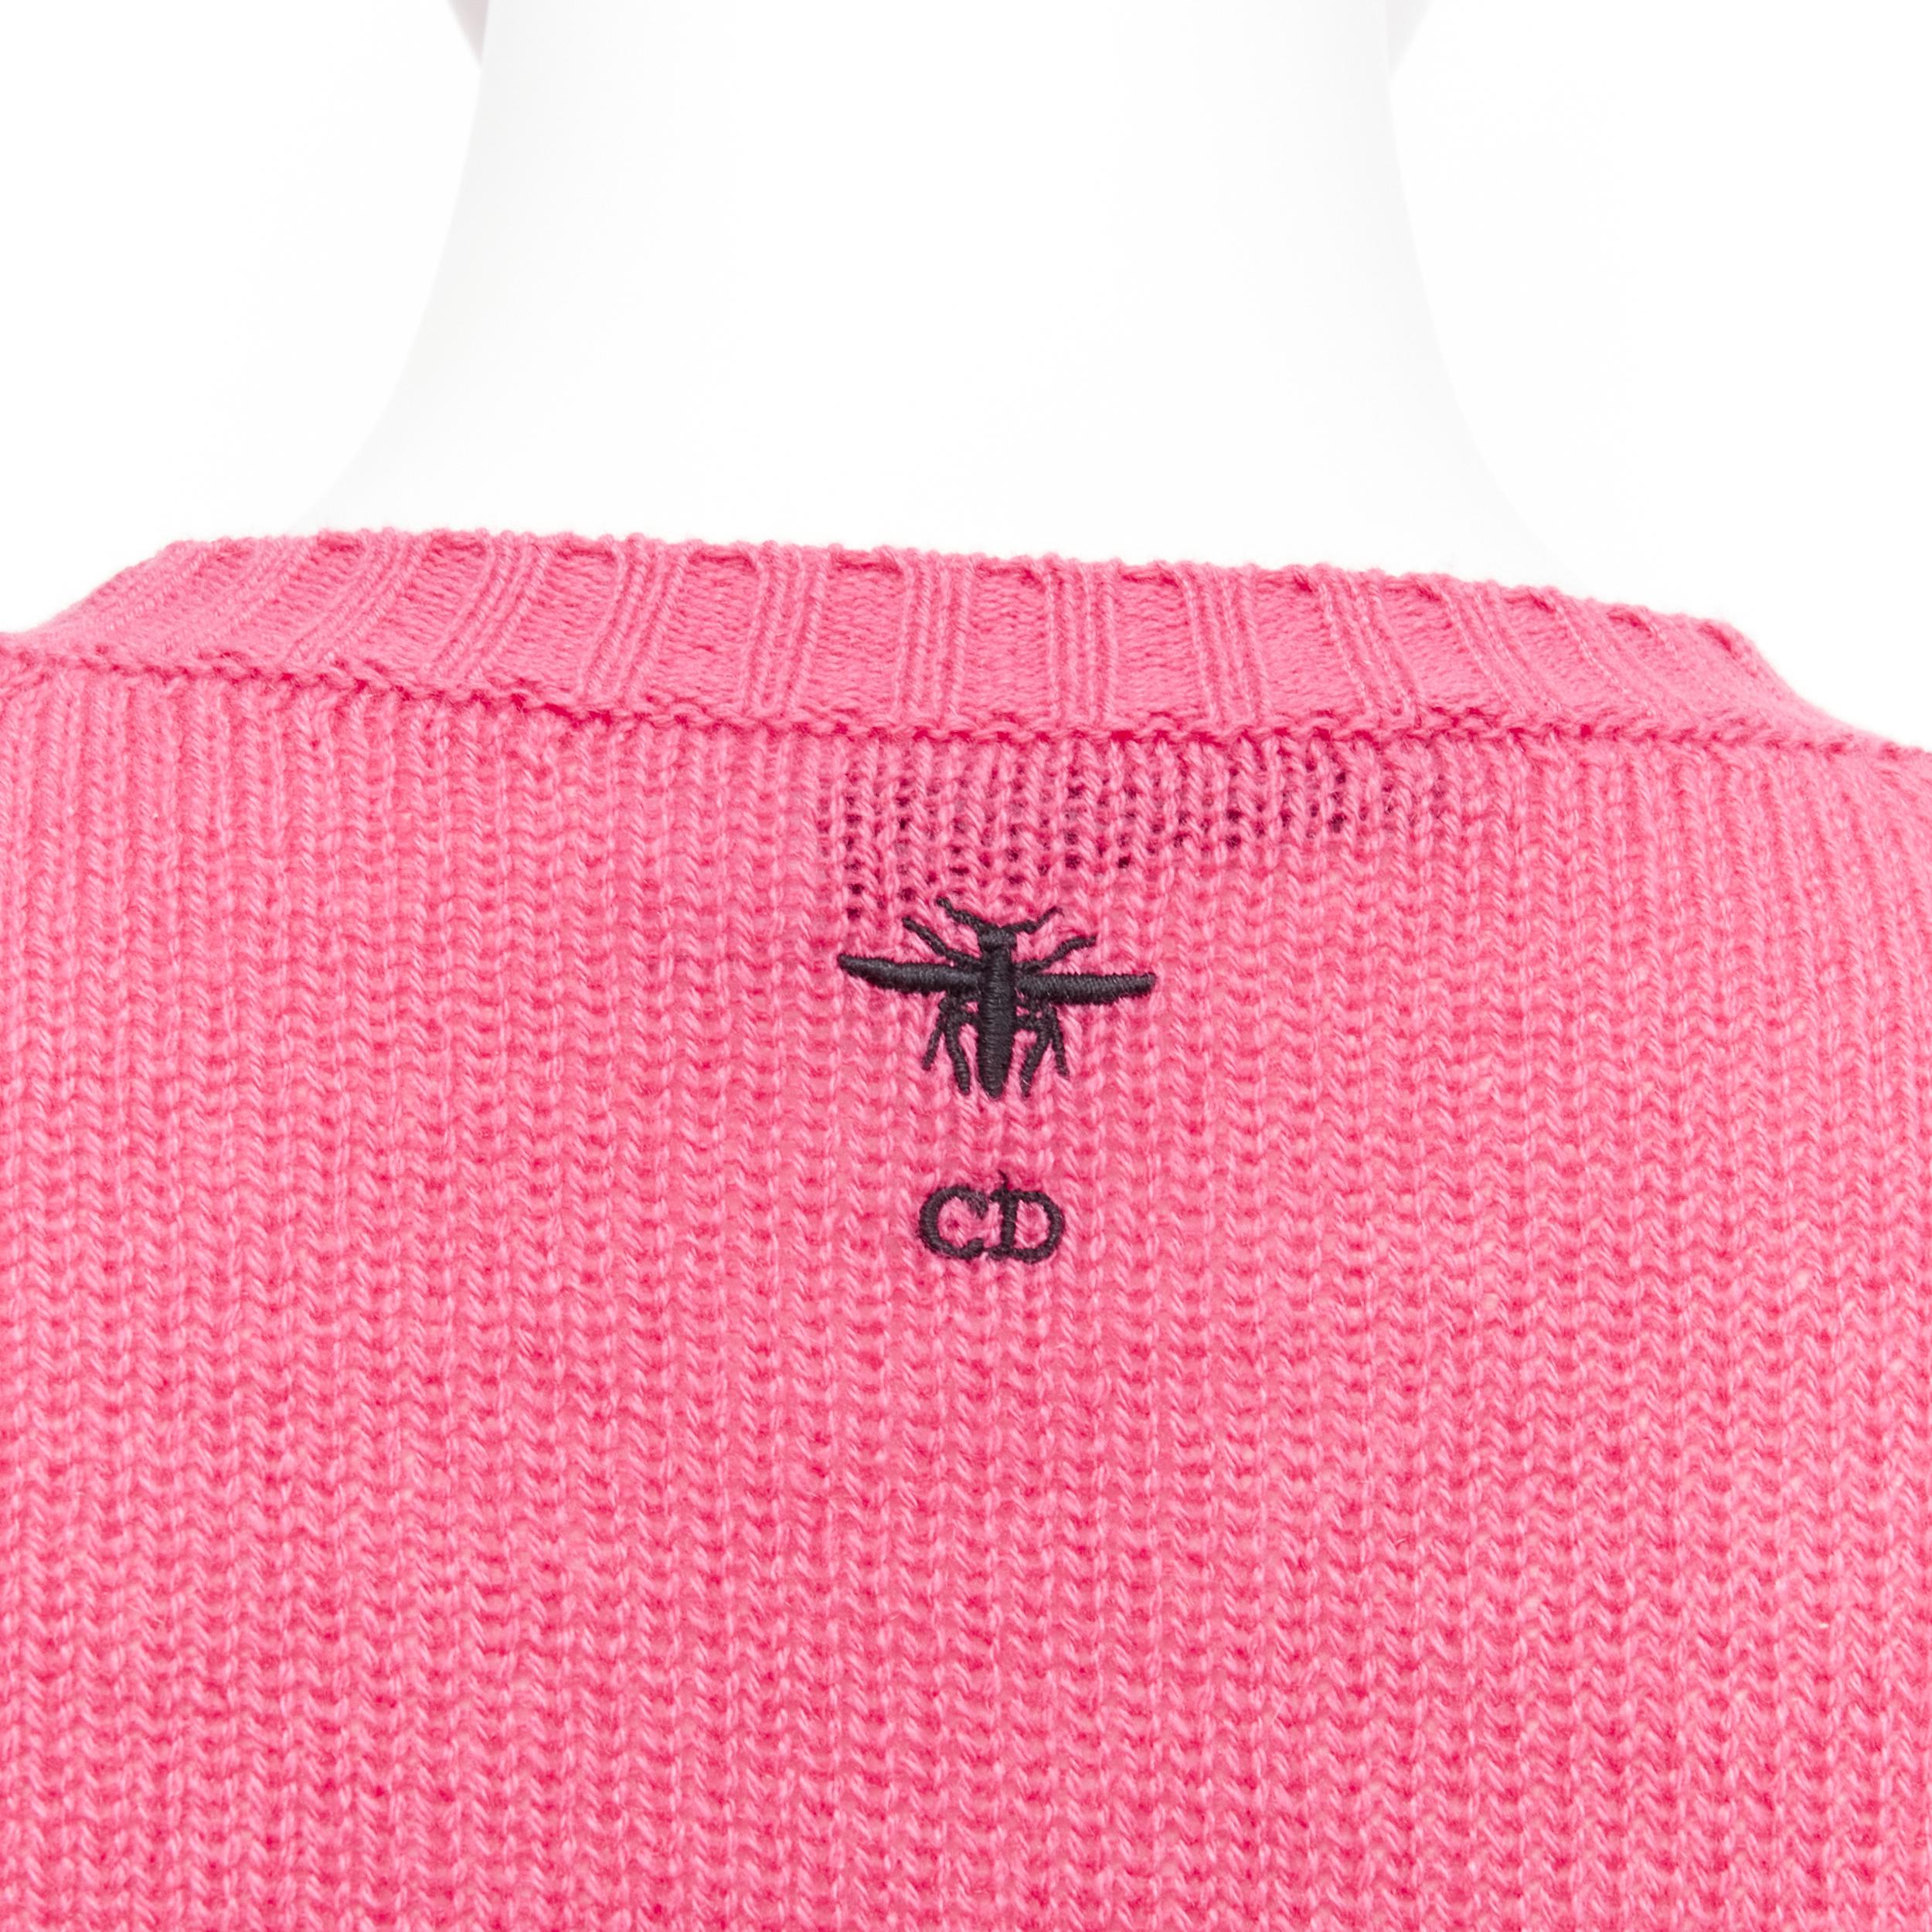 CHRISTIAN DIOR 2022 pink tree monkey tiger embroidery cropped sweater FR34 XS
Reference: AAWC/A00476
Brand: Christian Dior
Designer: Maria Grazia Chiuri
Collection: 2022
Material: Cashmere
Color: Pink, Multicolour
Pattern: Solid
Closure: